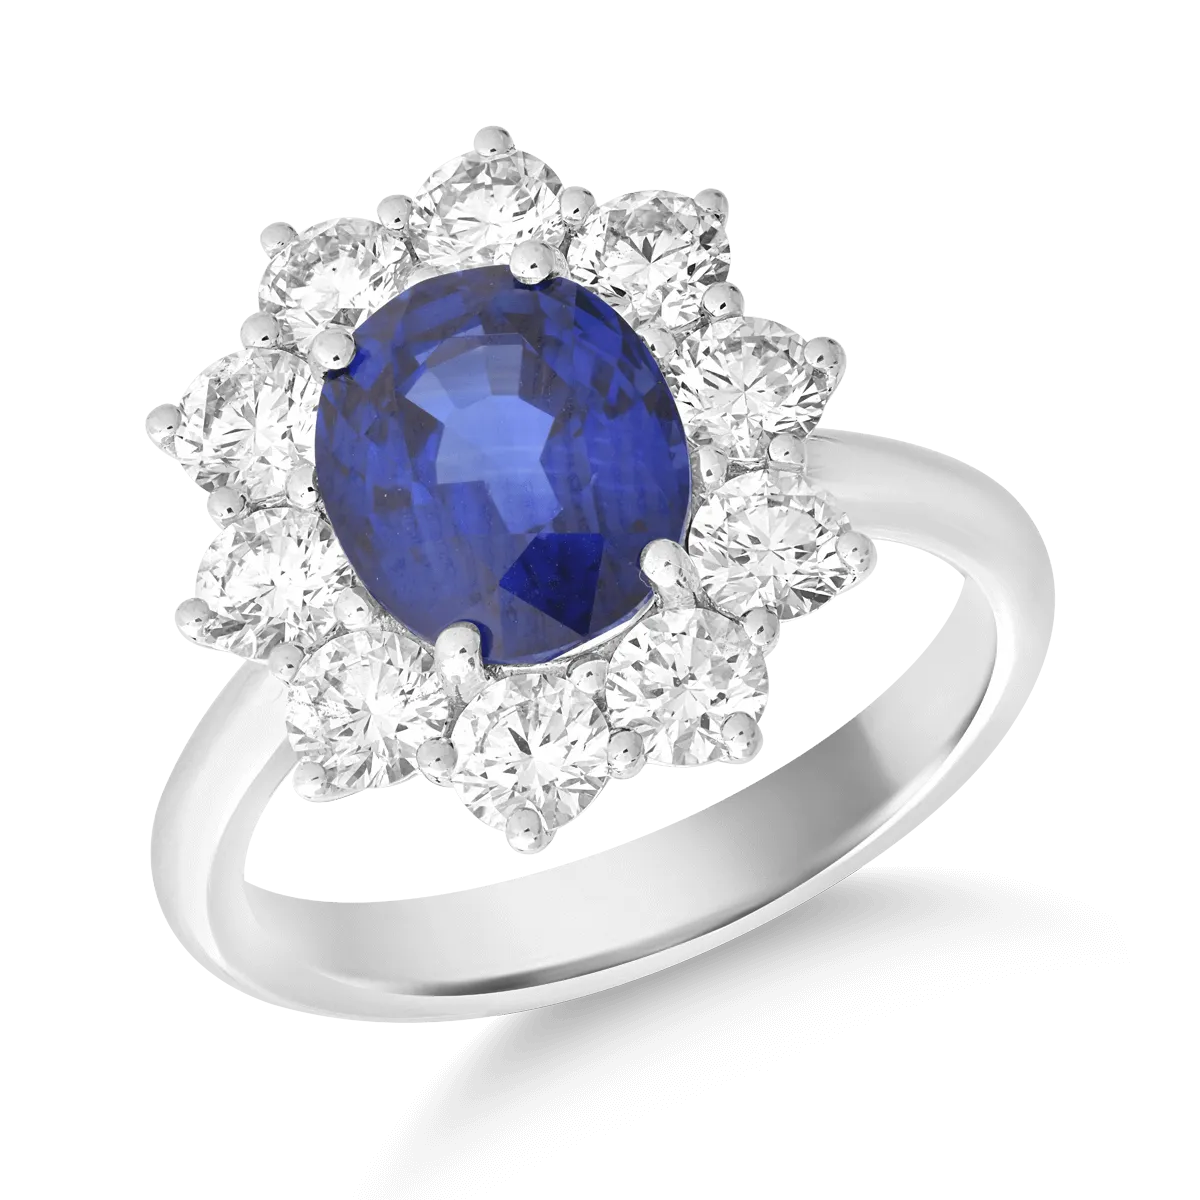 18K white gold ring with 3.42ct sapphire and 1.62ct diamonds